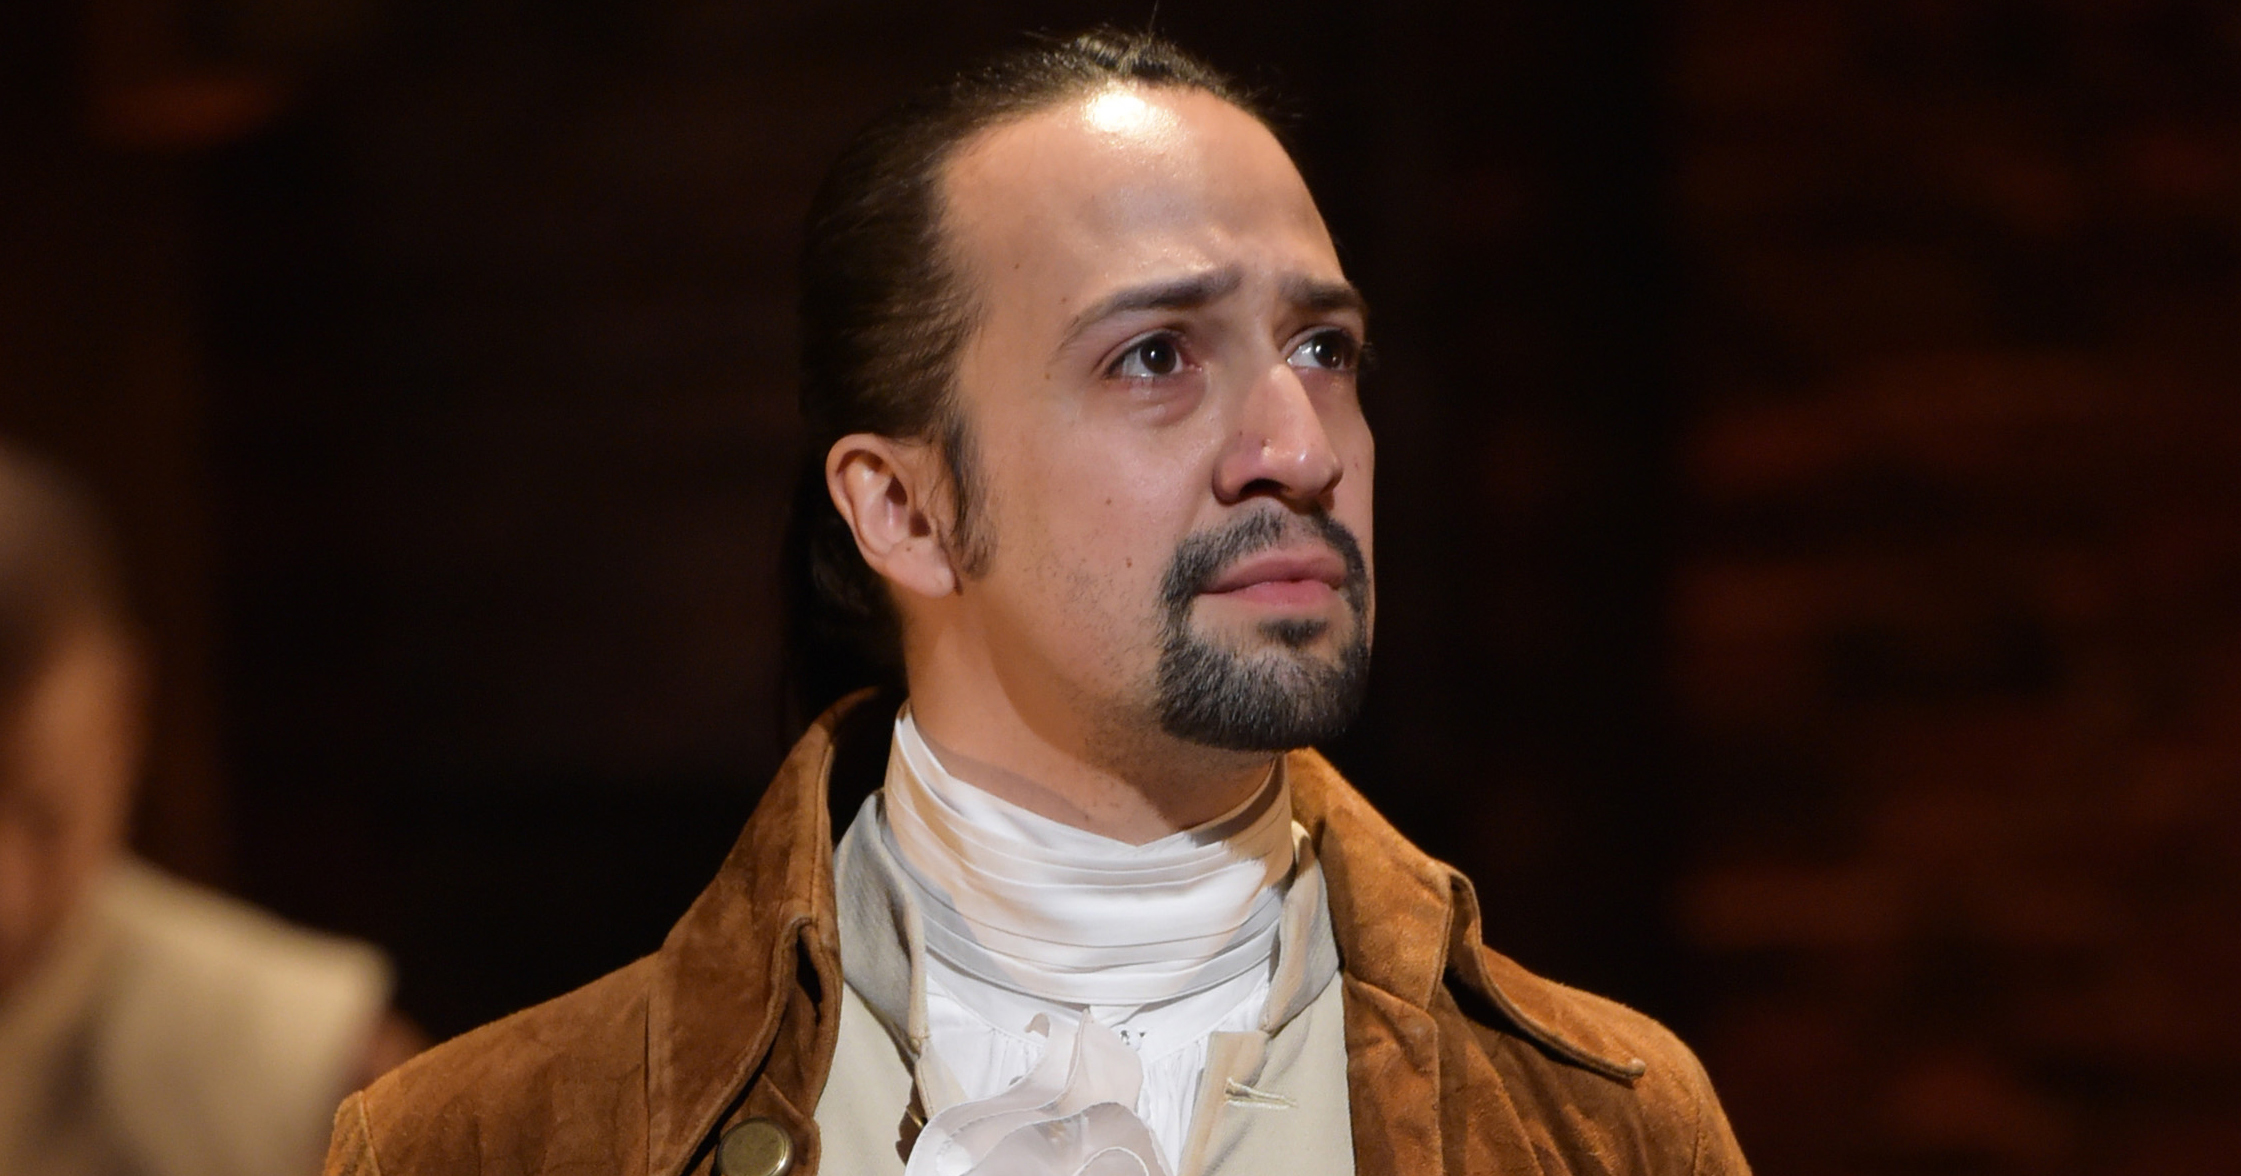 Lin-Manuel Miranda performs during the <i>Hamilton</i> GRAMMY performance on Feb. 15, 2016 in New York City. (Theo Wargo—Getty Images)